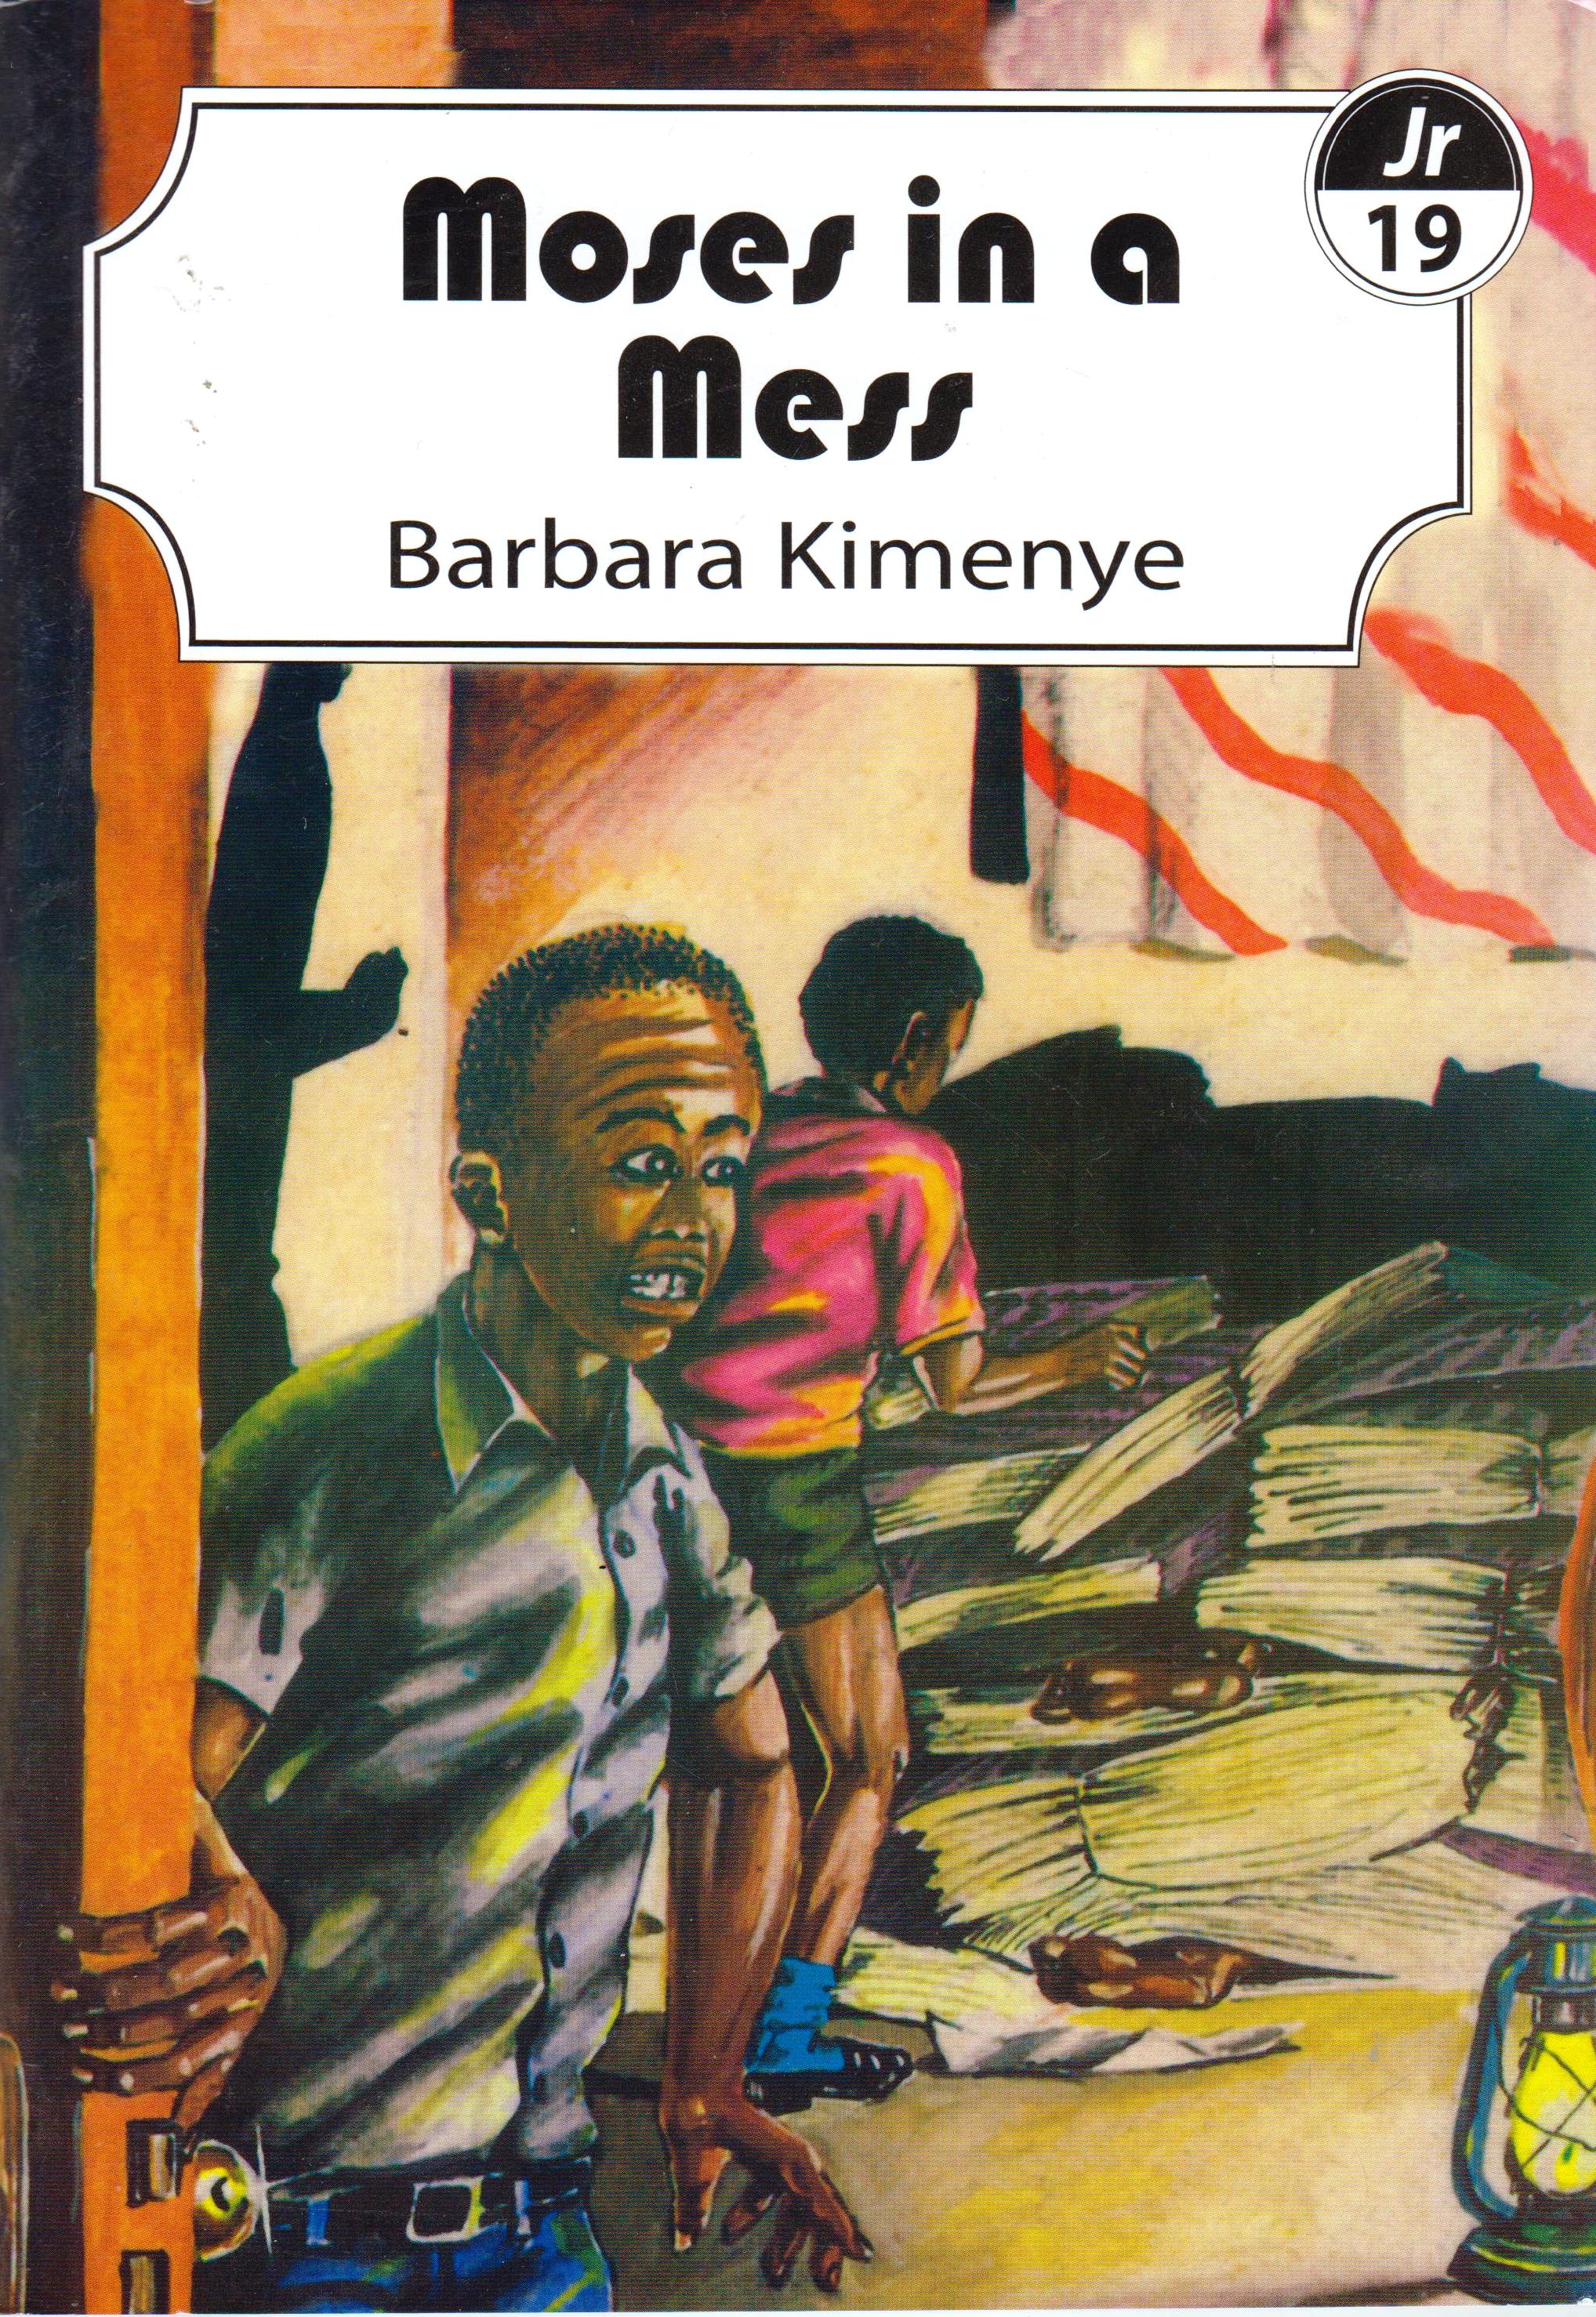 Moses in a Mess EAEP readers 10 - 13 years